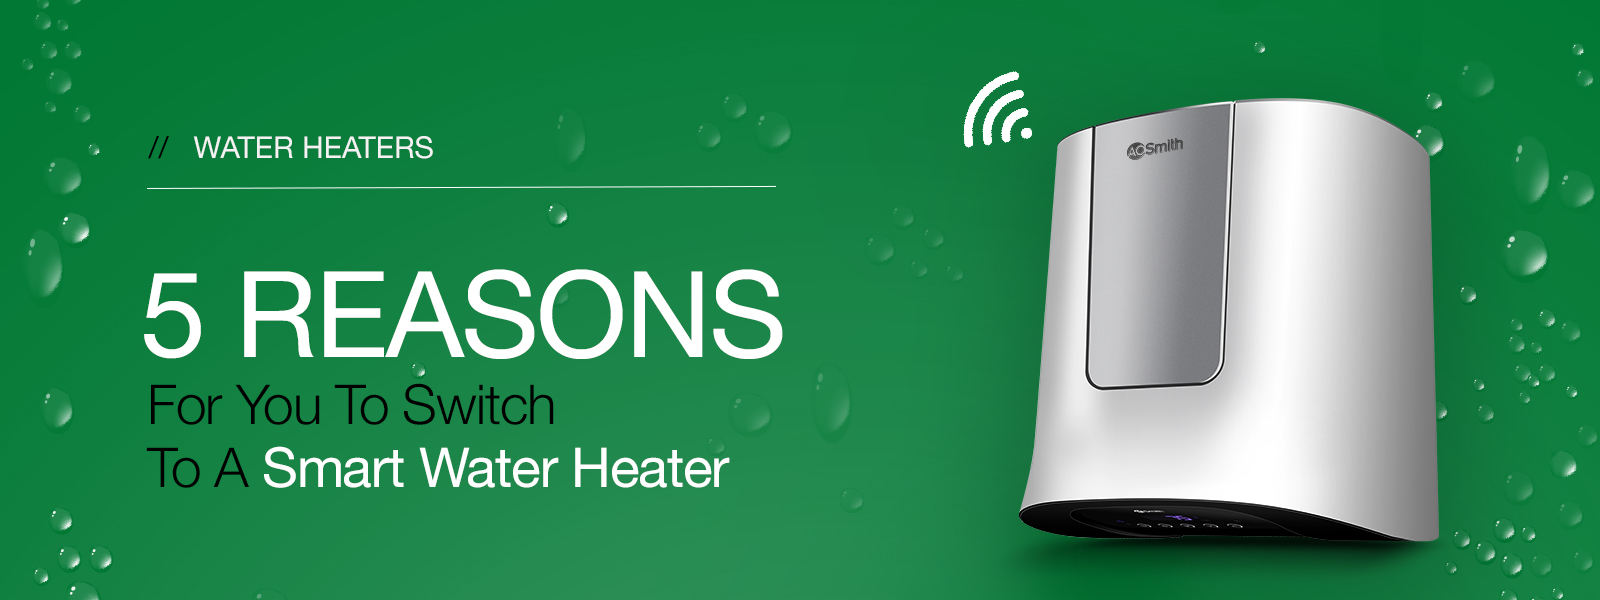 5 Reasons for You to Switch to a Smart Water Heater